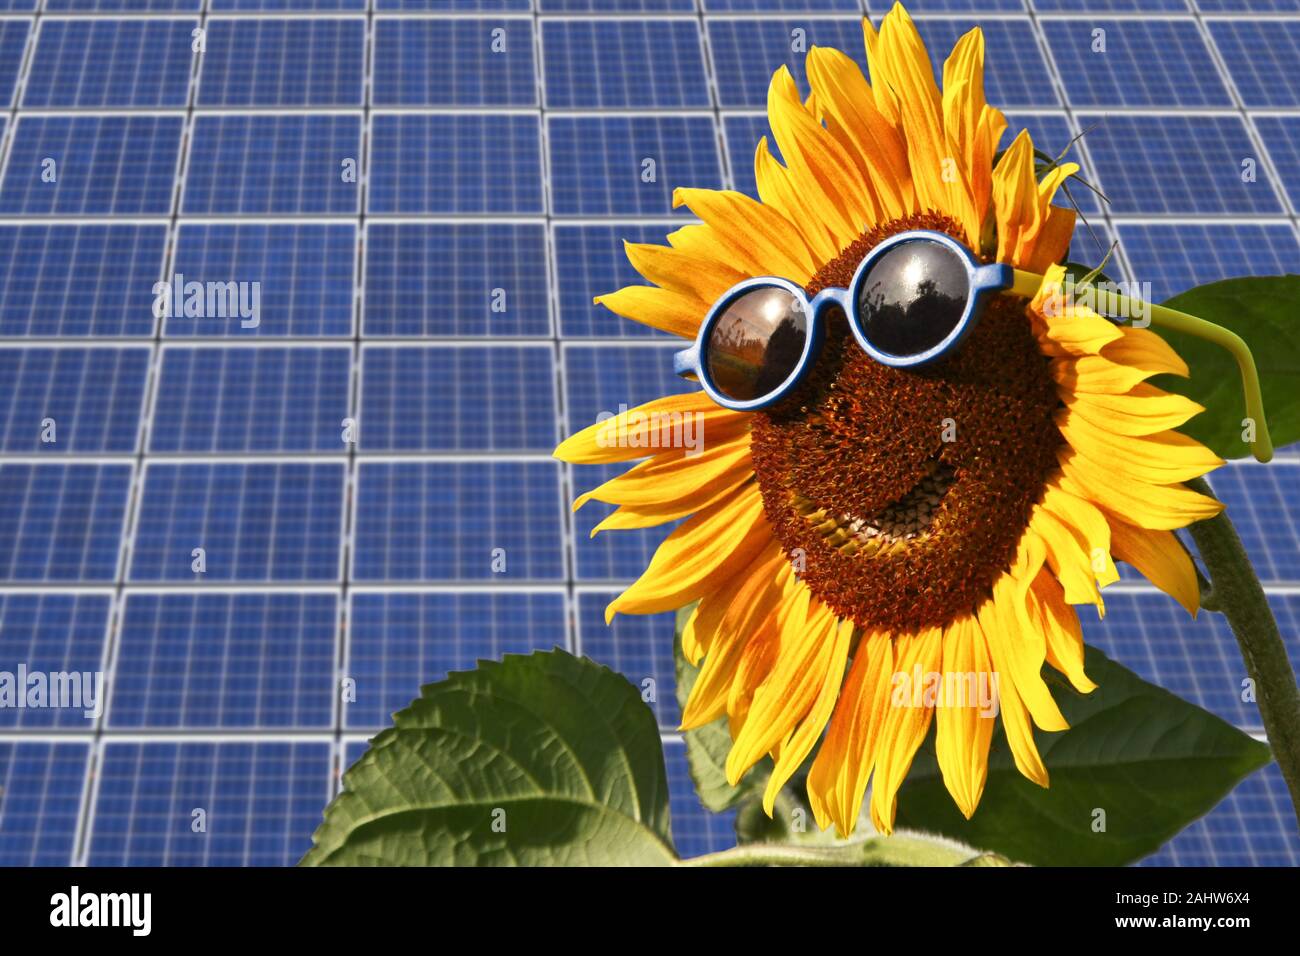 Solar modules with sunflower Stock Photo